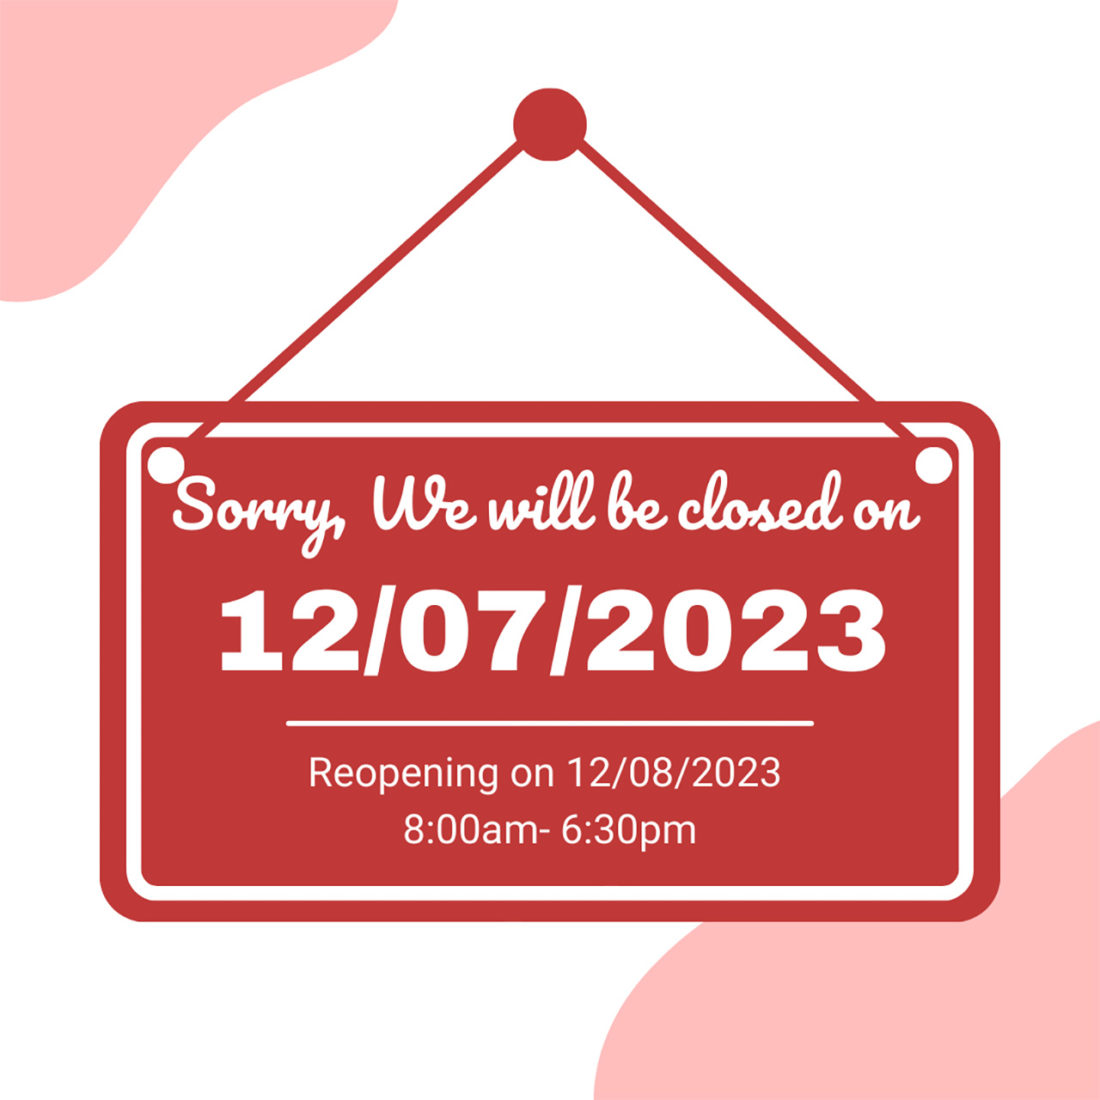 We will be closed on 12/07/23.